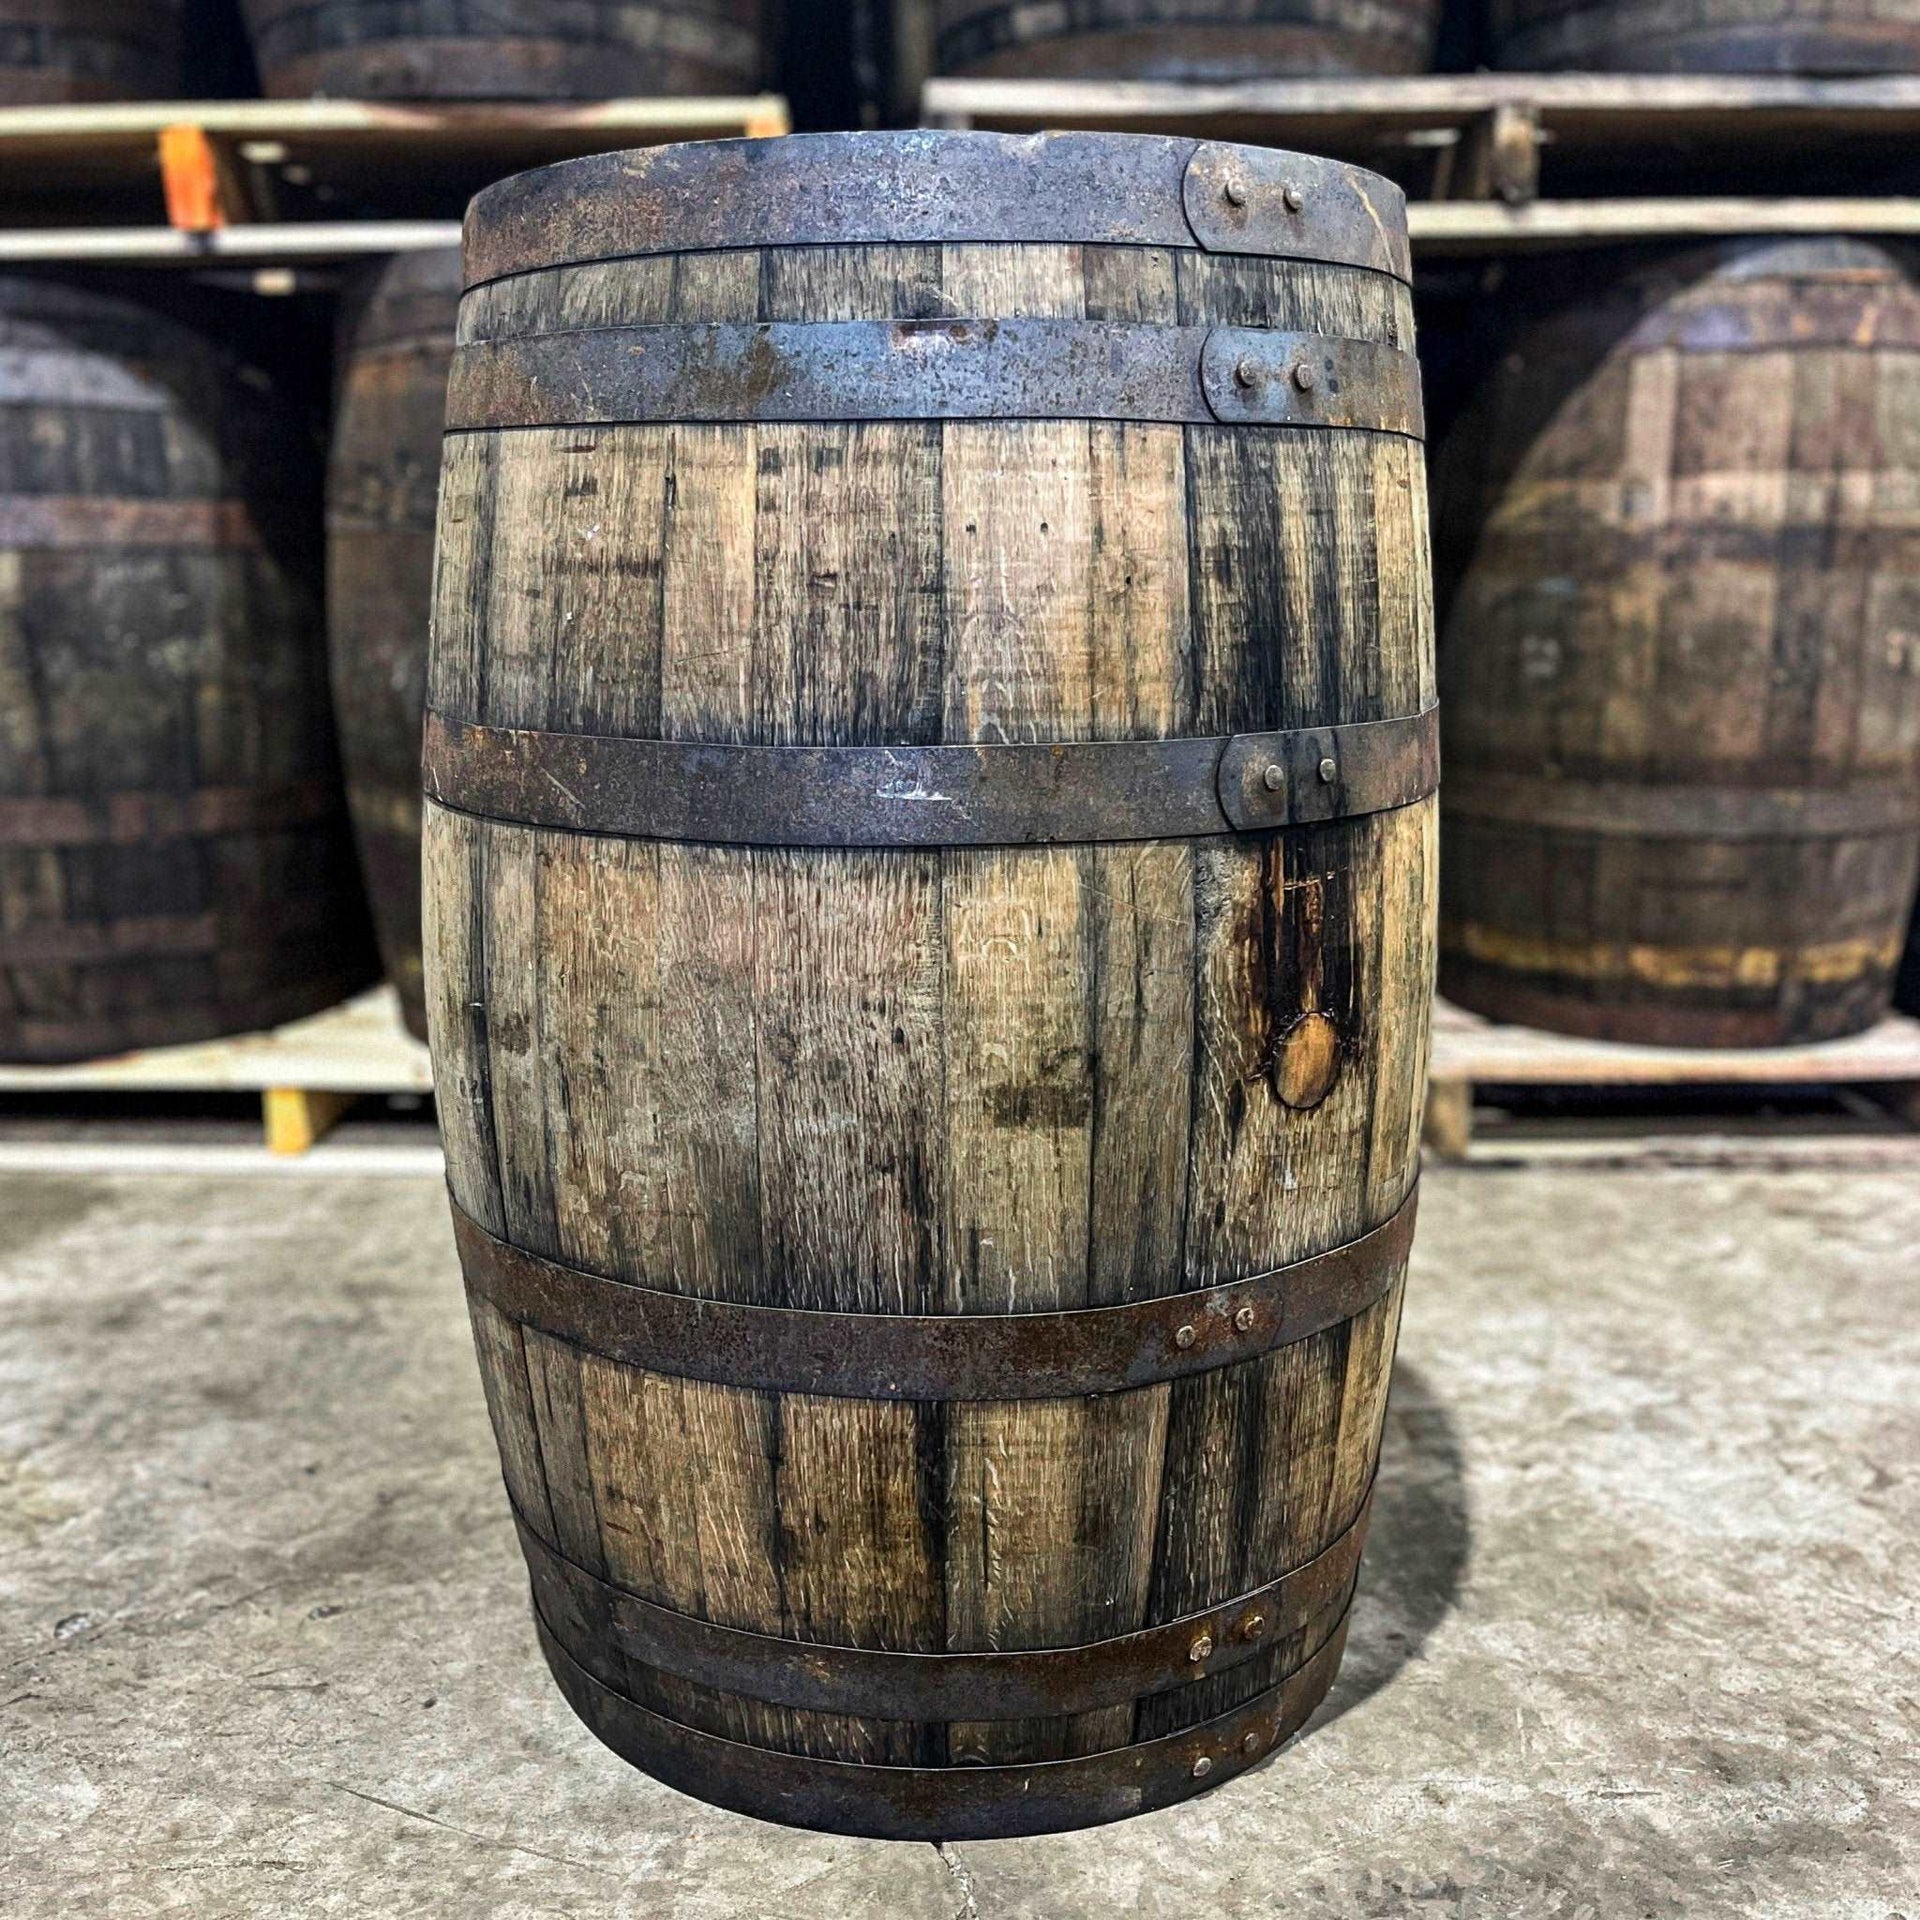 53 Gallon - Canadian Whisky Barrel - Furniture Grade - The County Cooperage